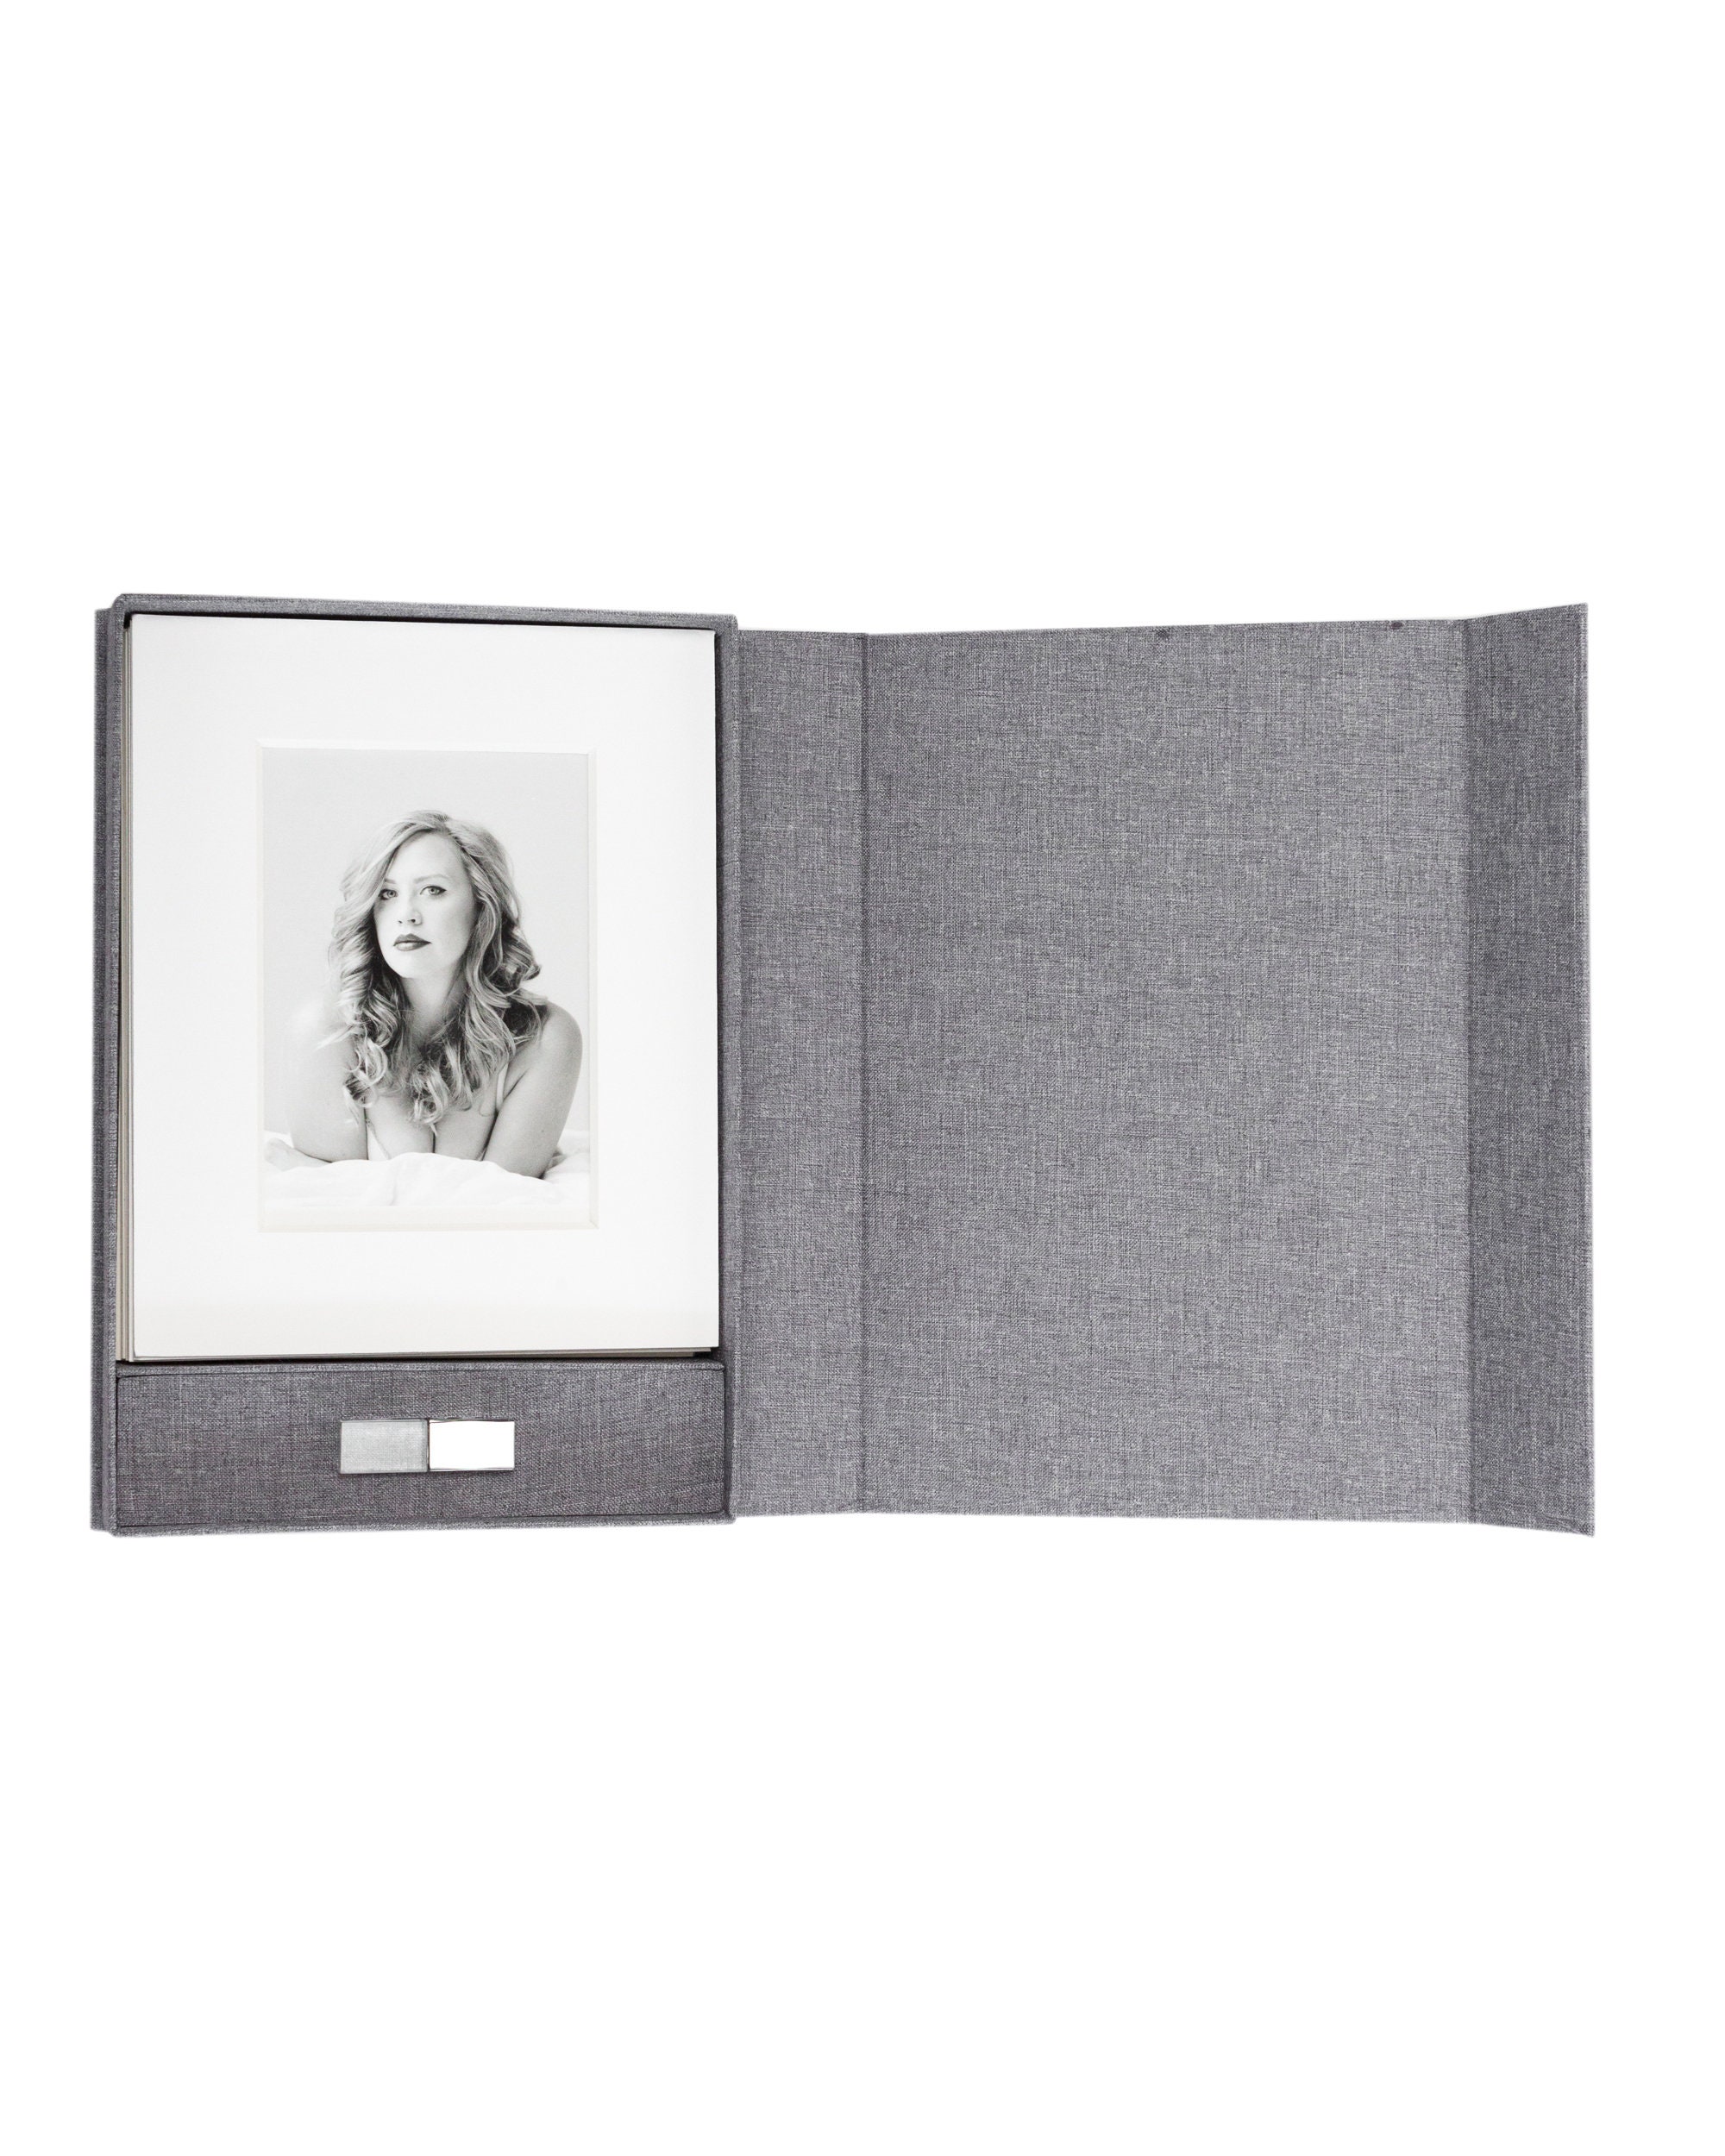  Pssoss Photo Album 8x10 with Writing Space Linen Cover 8x10  Photo Album Book Holds 30 Photos Ideal for Wedding Theme-Album and Baby  Photo Albums (Black,30 Pockets) : Home & Kitchen